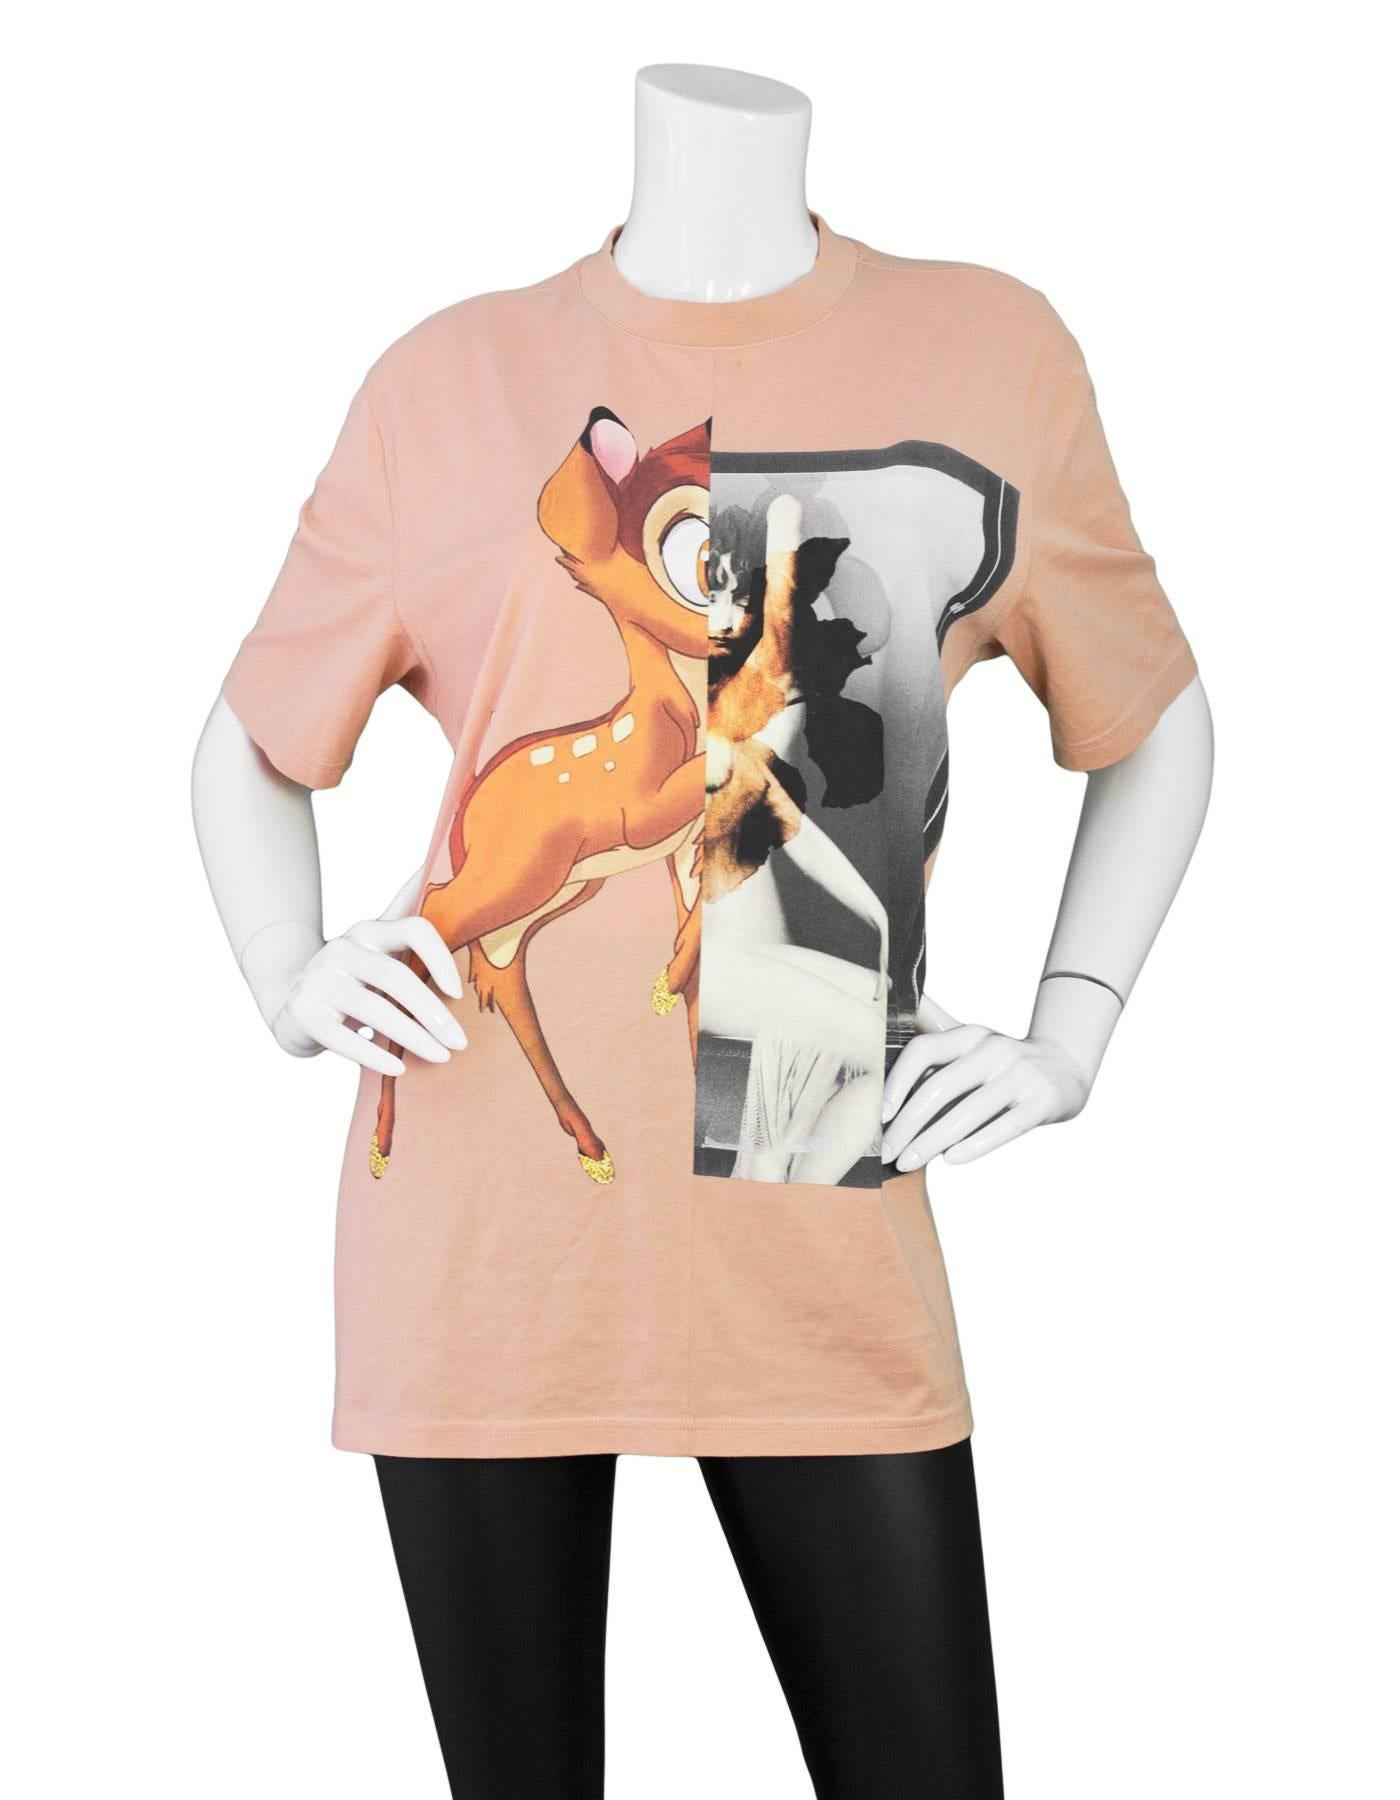 Givenchy NEW Peach Bambi Print Cotton T-Shirt 

Made In: Portugal
Color: Peach
Composition: 100% cotton
Lining: None
Closure/Opening: Pull over 
Exterior Pockets: None
Interior Pockets: None
Retail Price: $730 + tax
Overall Condition: Excellent-tags